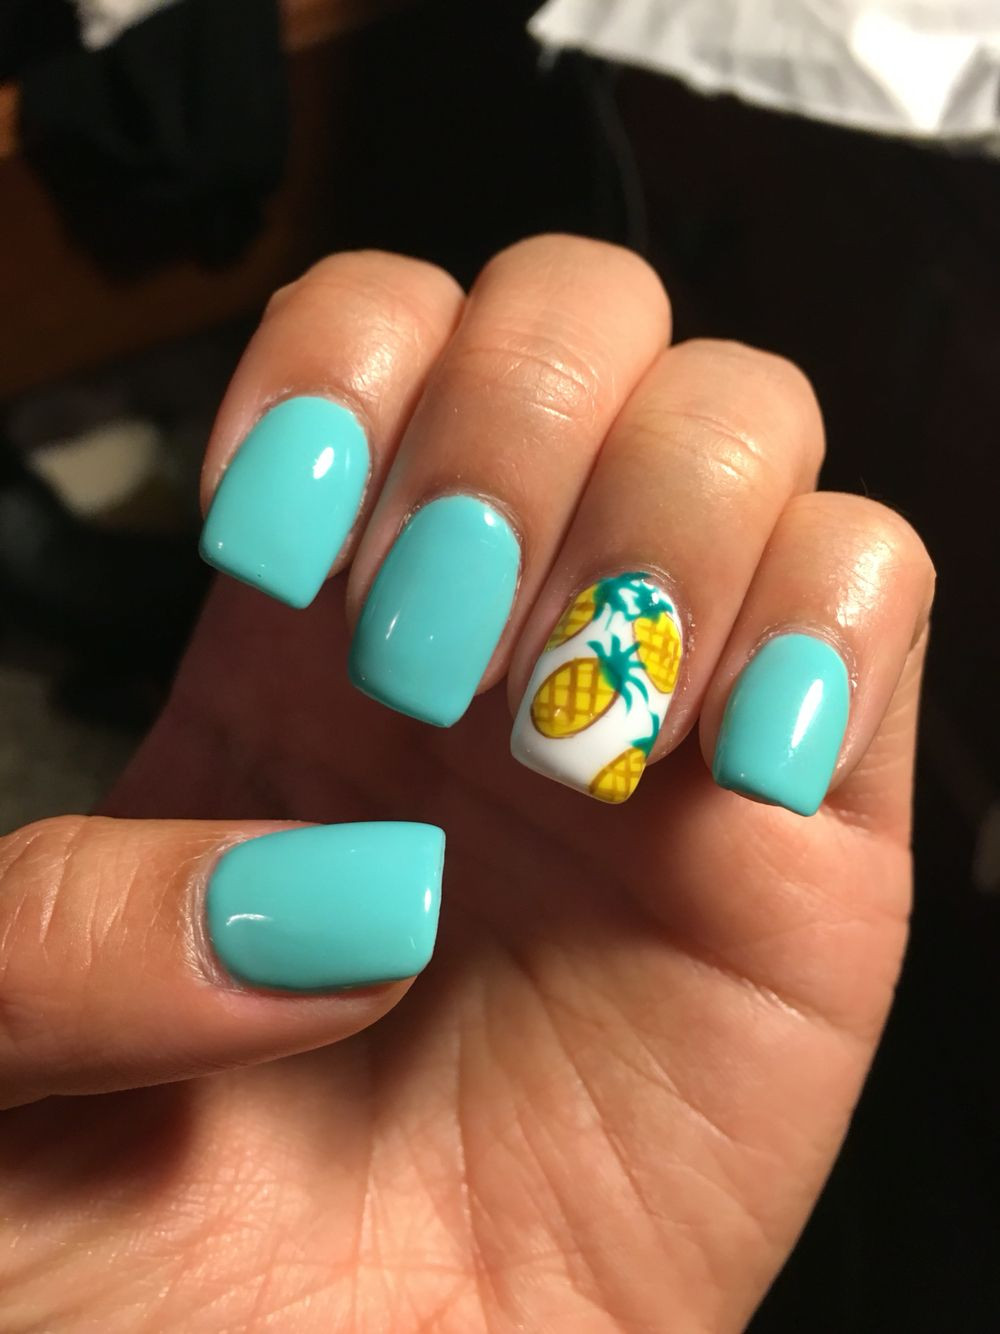 Cute Nail Ideas For Summer
 Pin on My nails